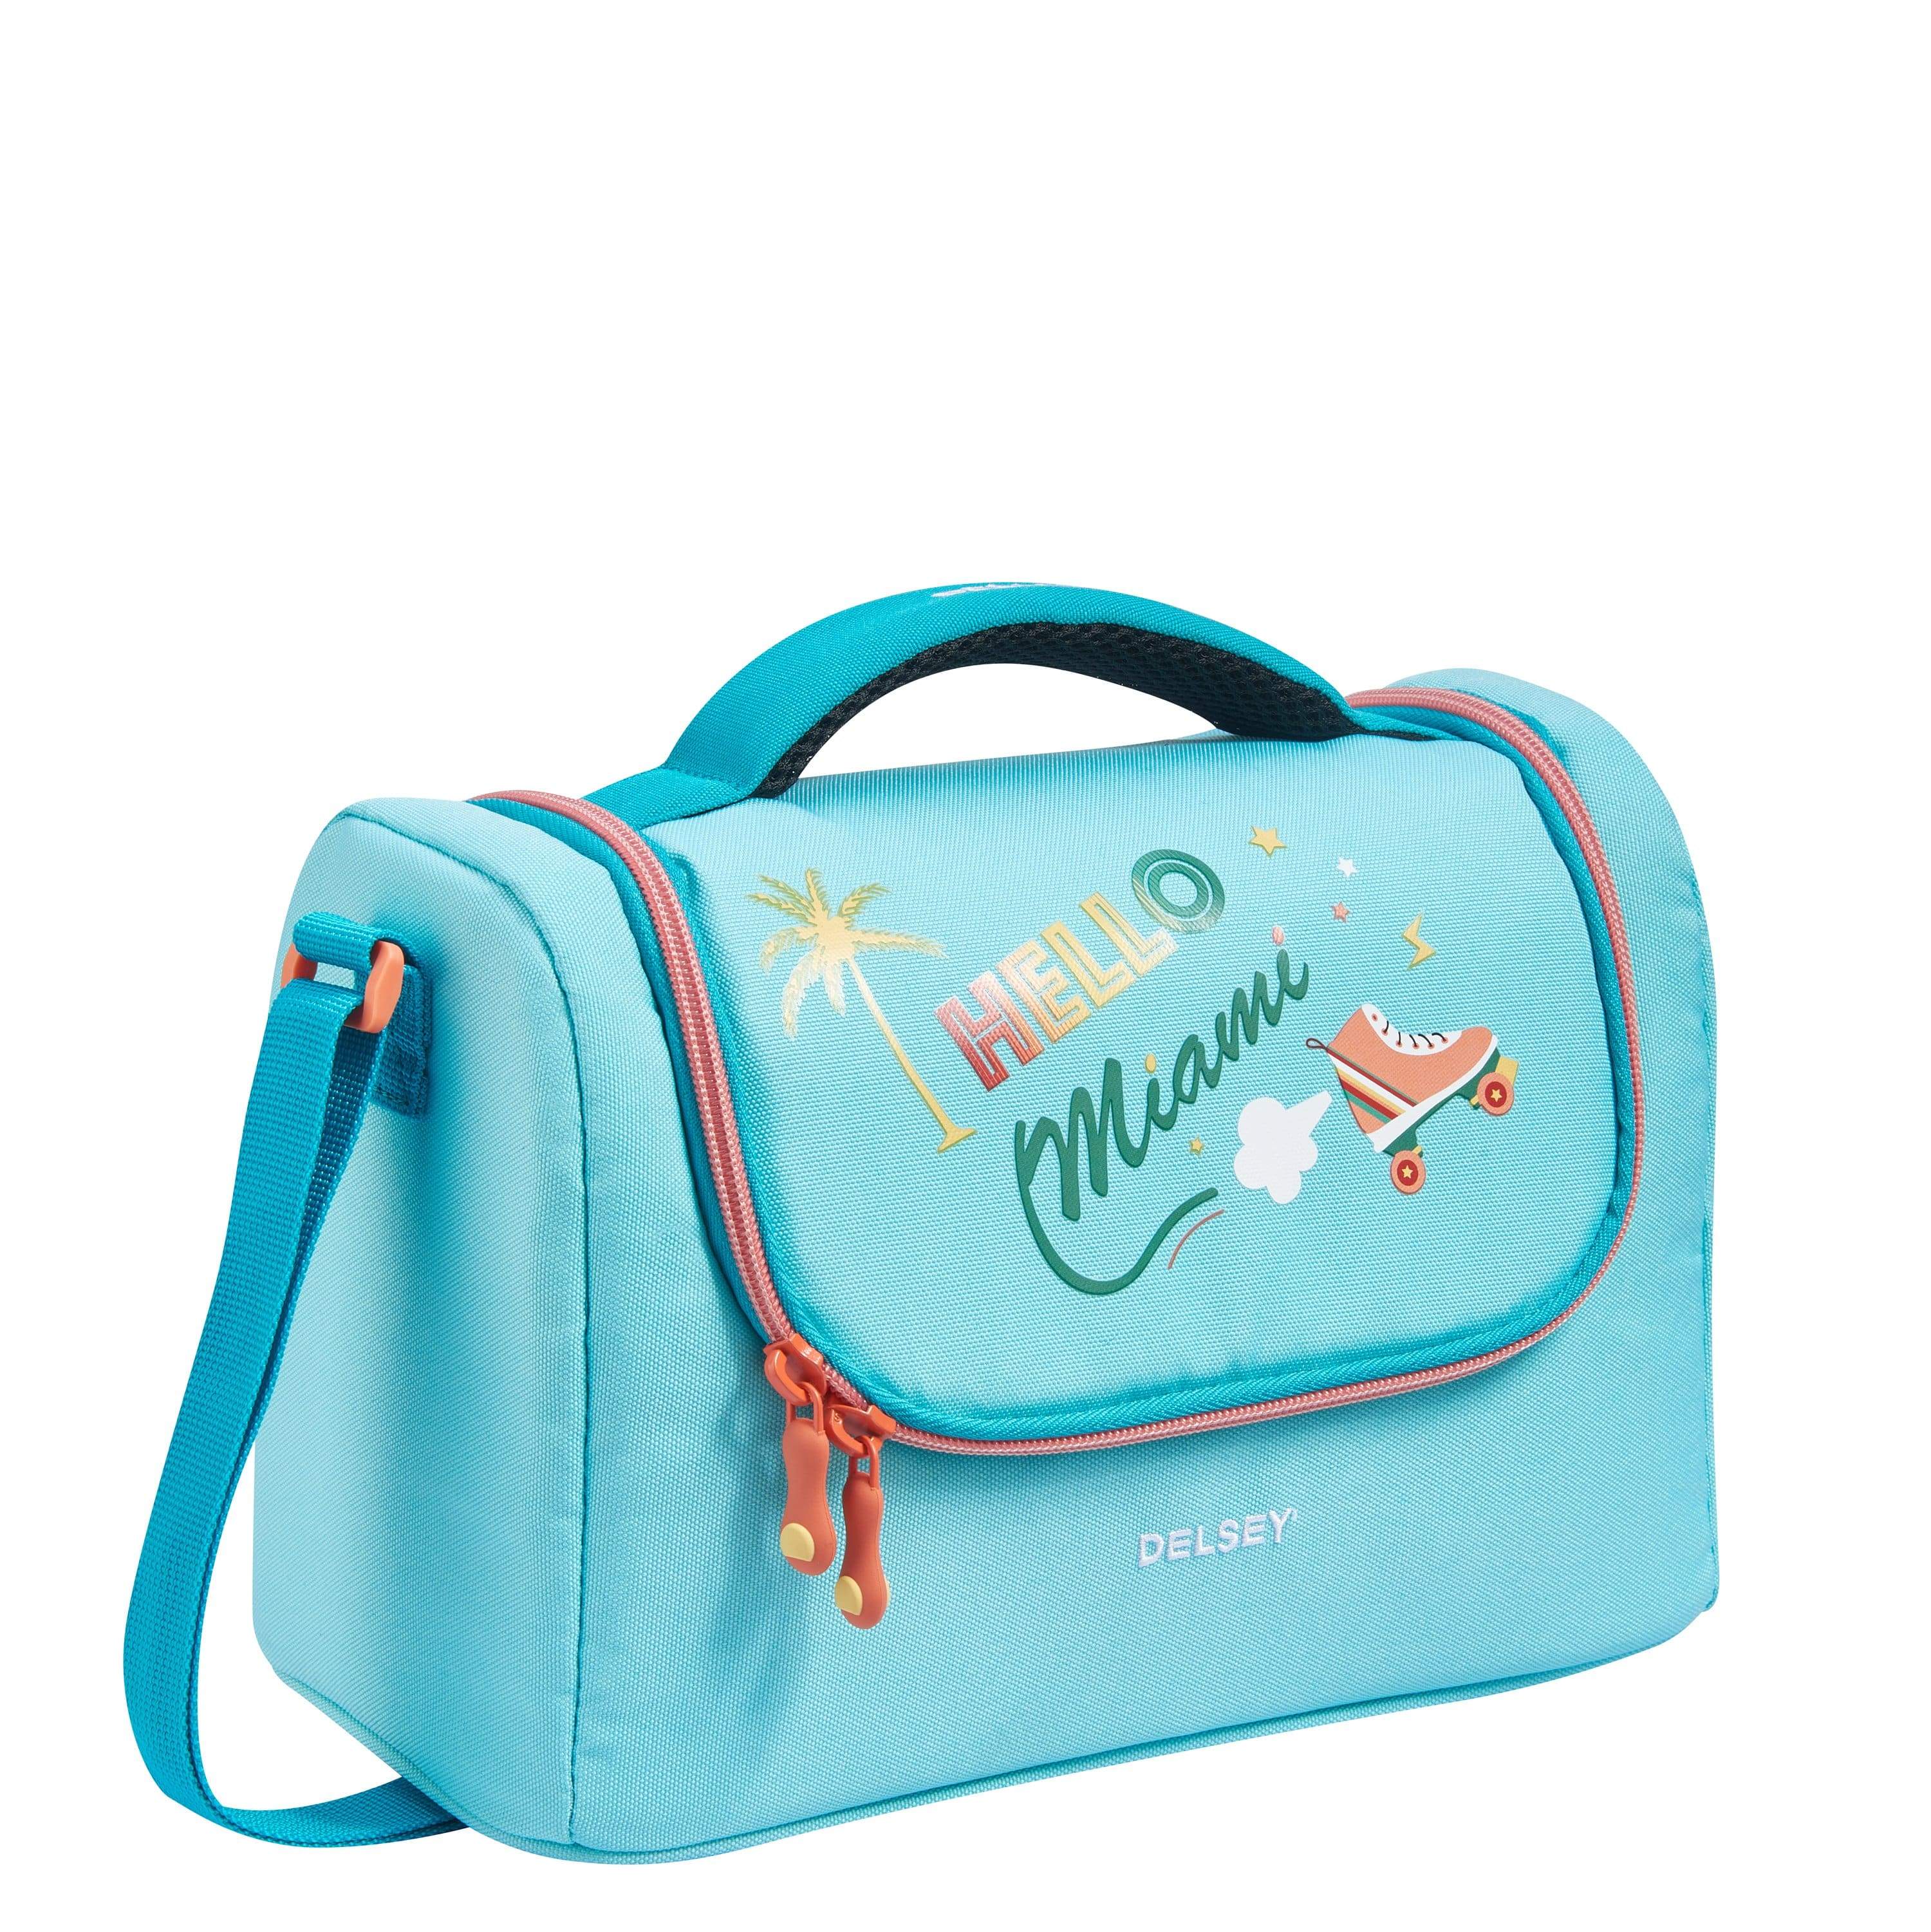 DELSEY SCHOOL 2019 ISOTHERM LUNCH BAG MIAMI TURQUOISE 00339319012 TURQUOISE